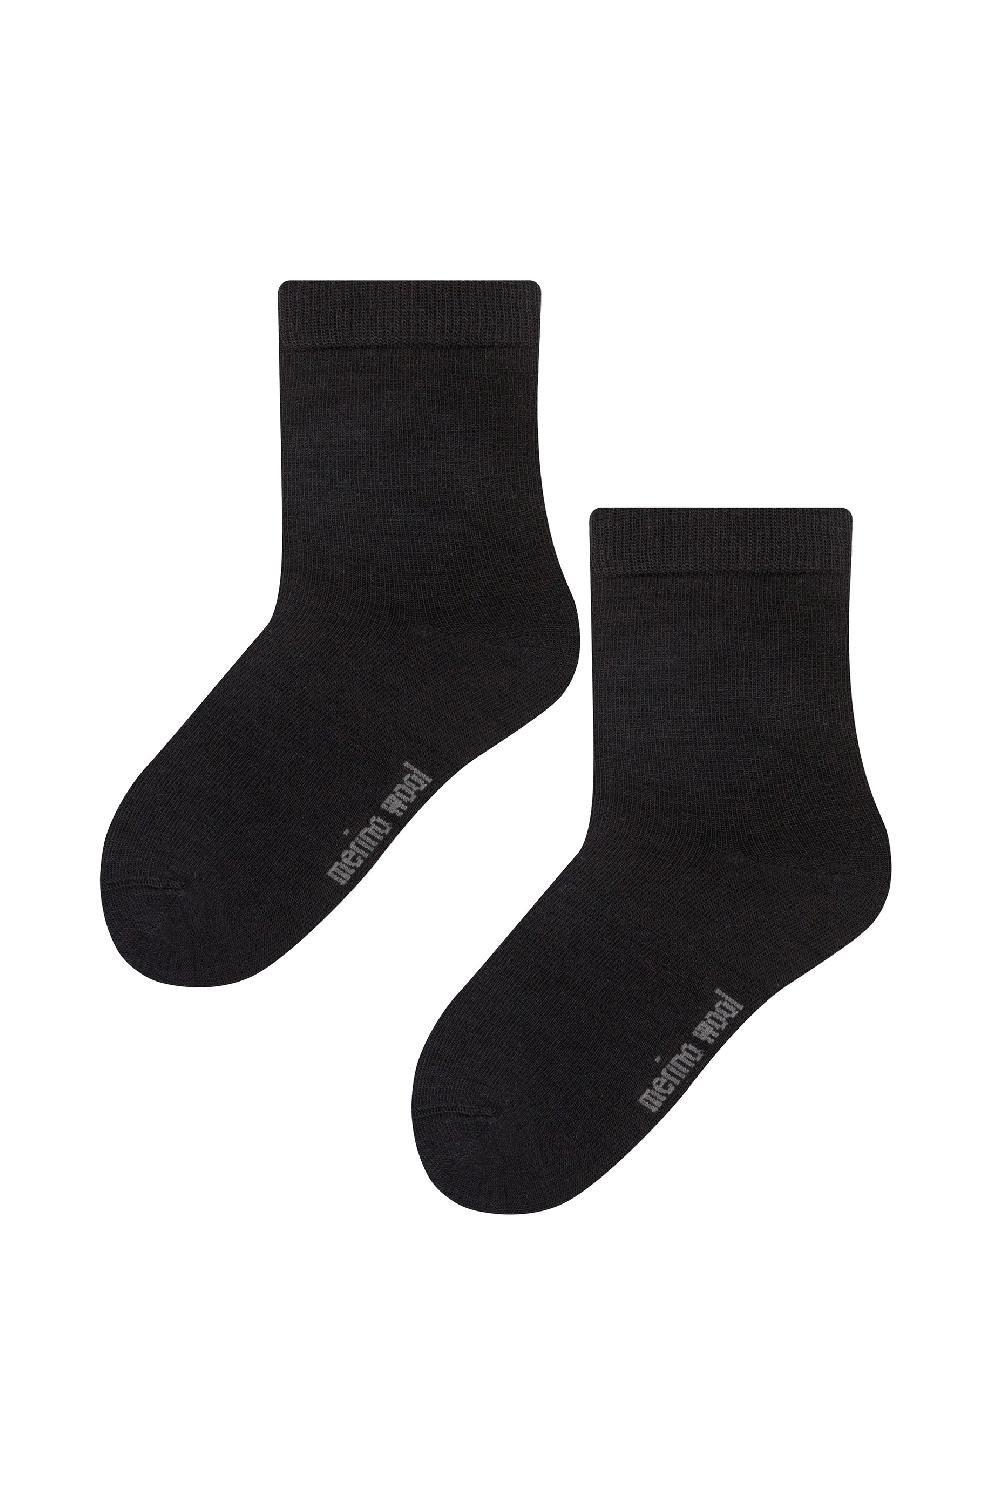 Warm Merino Wool Thermal Knitted Ribbed Socks for Winter